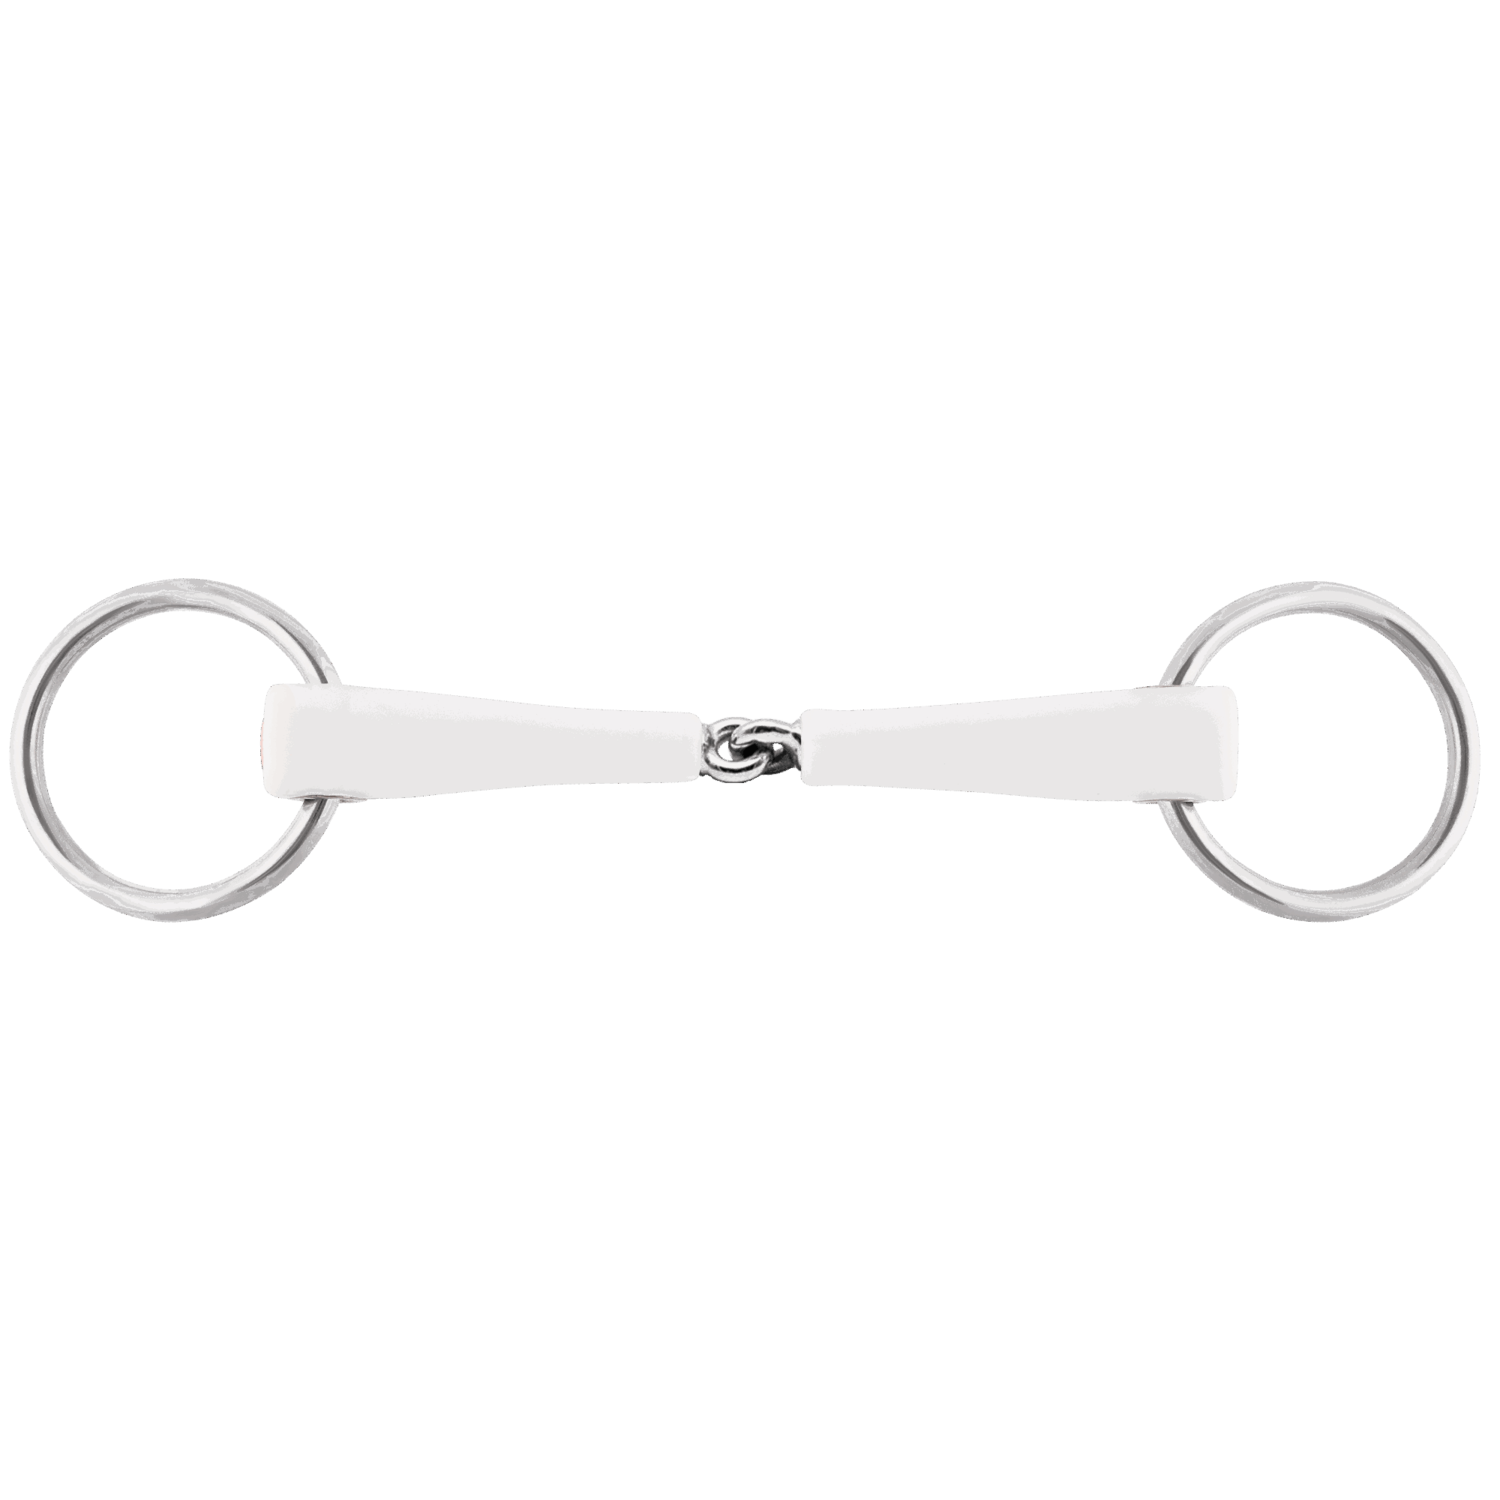 Nathe Loose Ring Single Joint Snaffle- 55mm ring